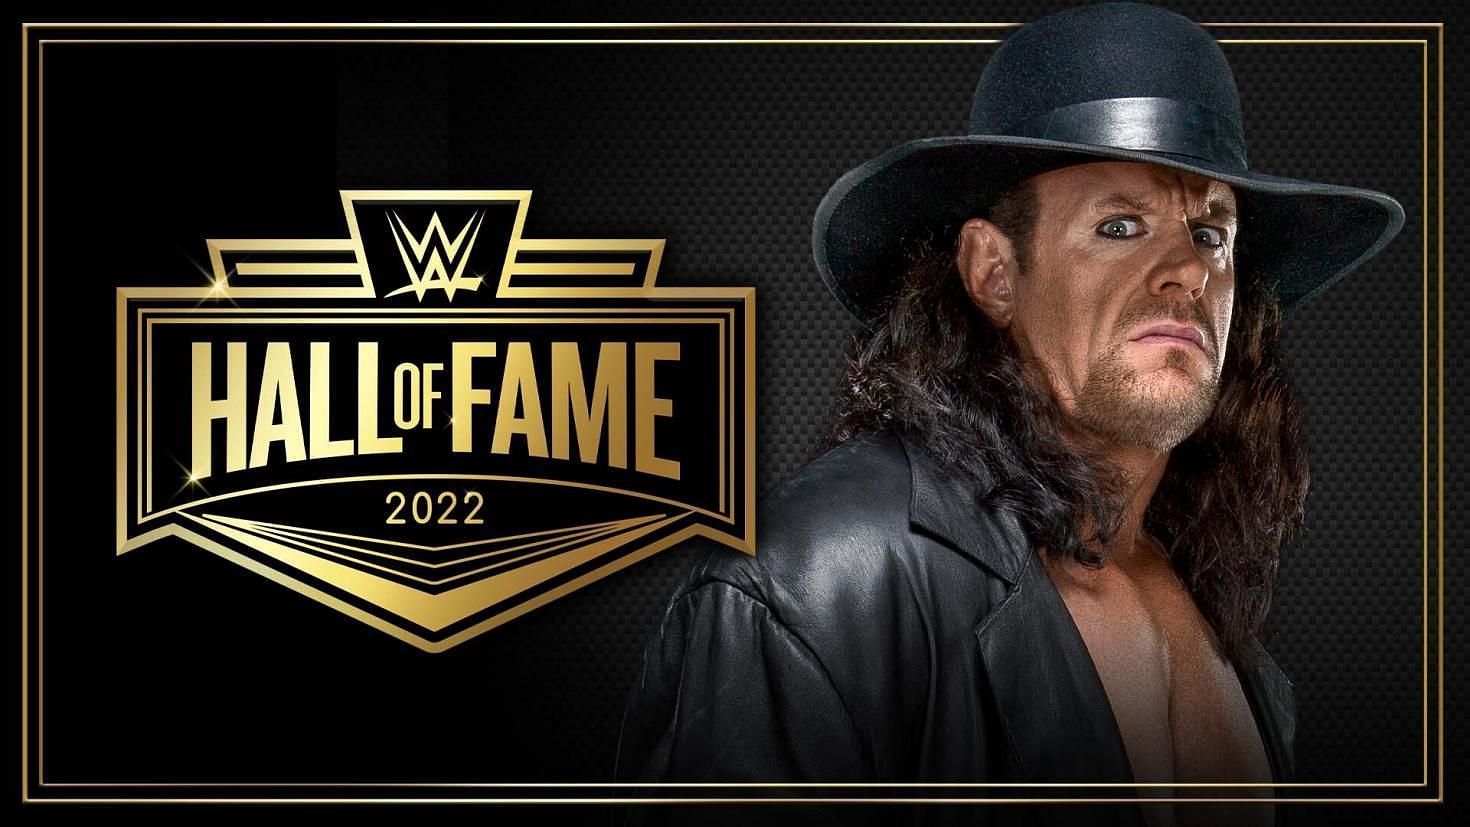 The Undertaker will headline the 2022 Hall of Fame.